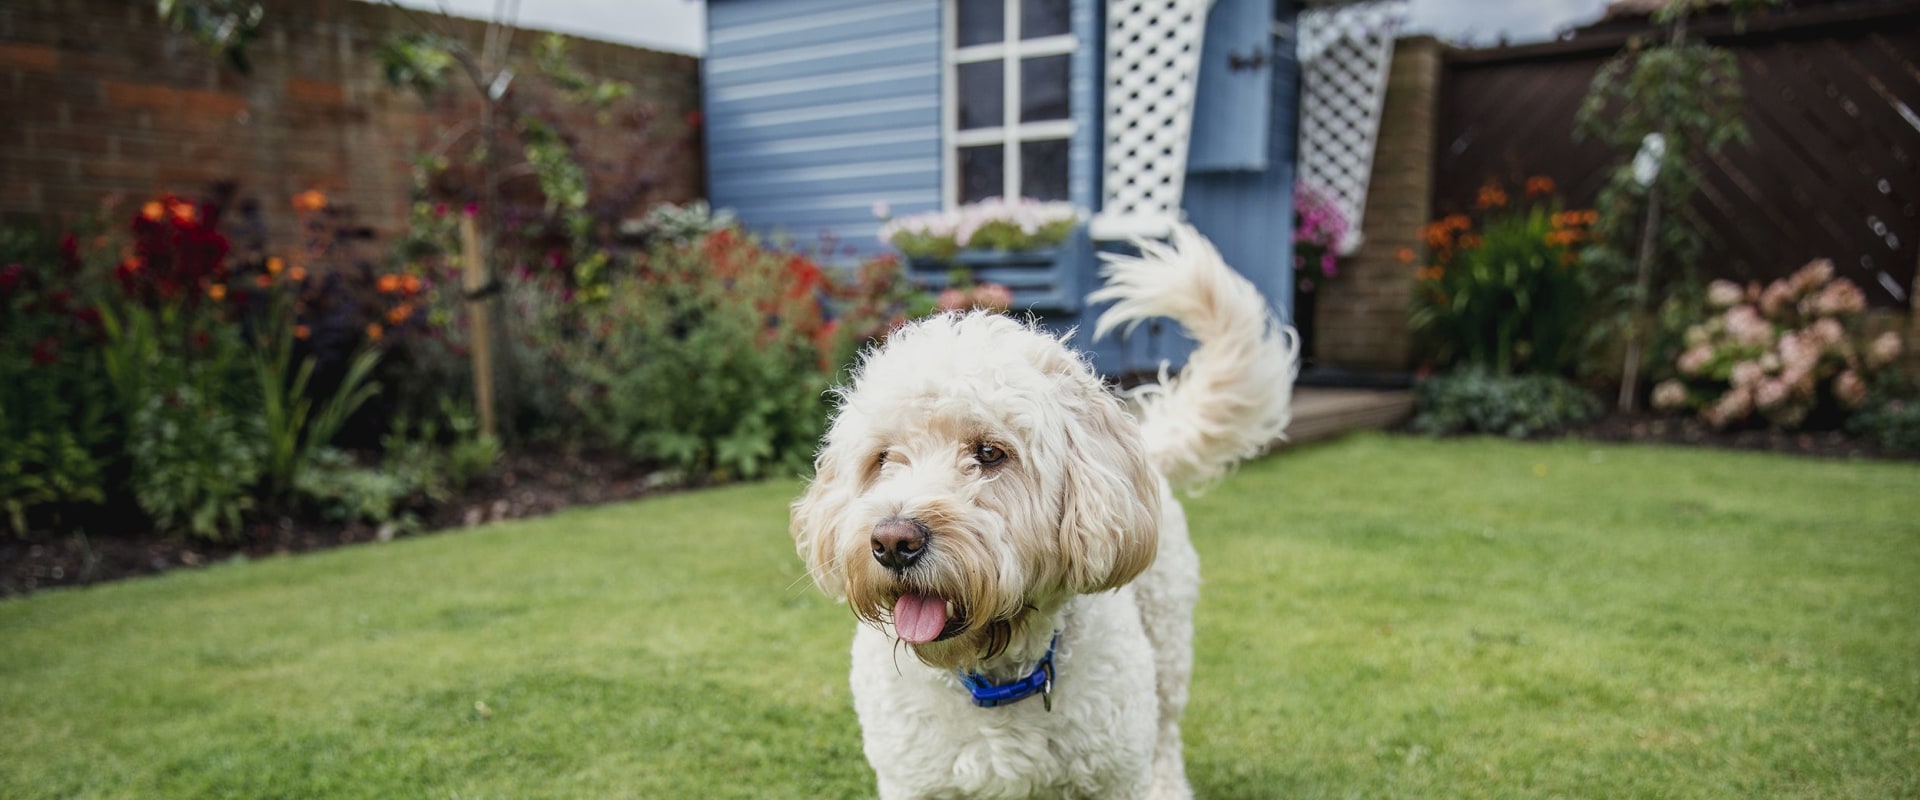 Pet-Friendly Airbnb Options for Staying in Hertfordshire